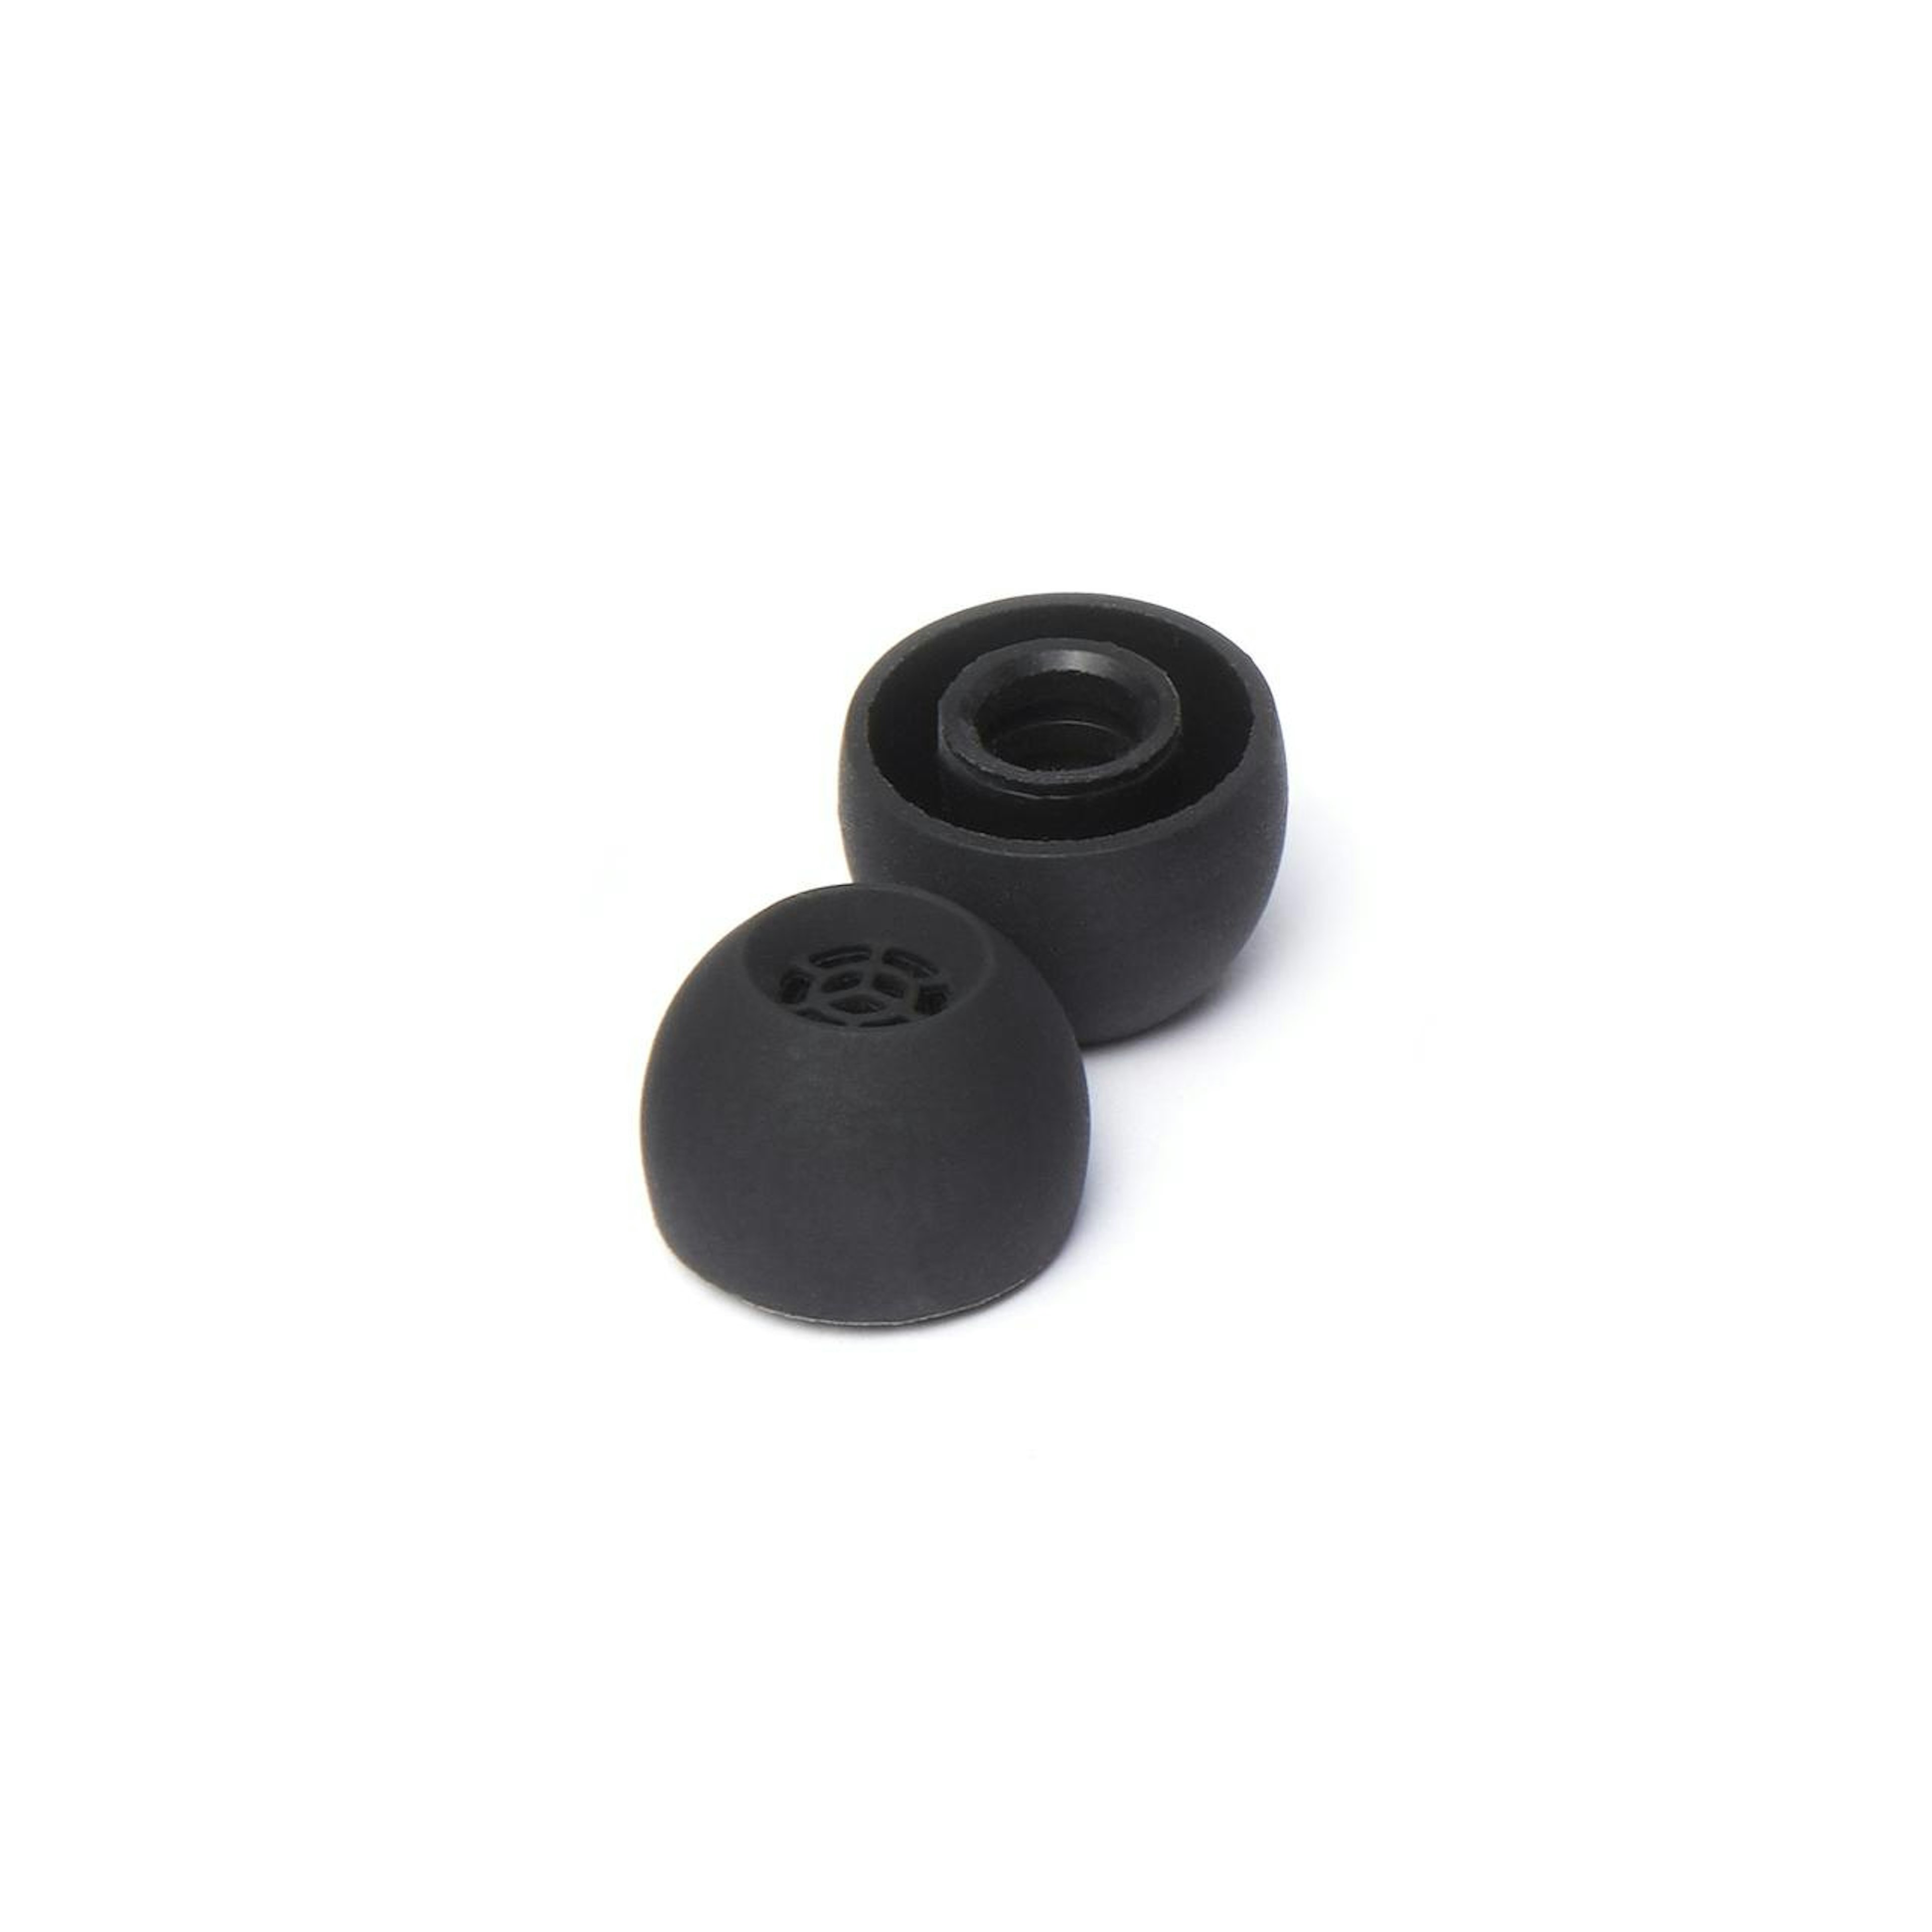 IE Series Ear Adapter Silicone (M)